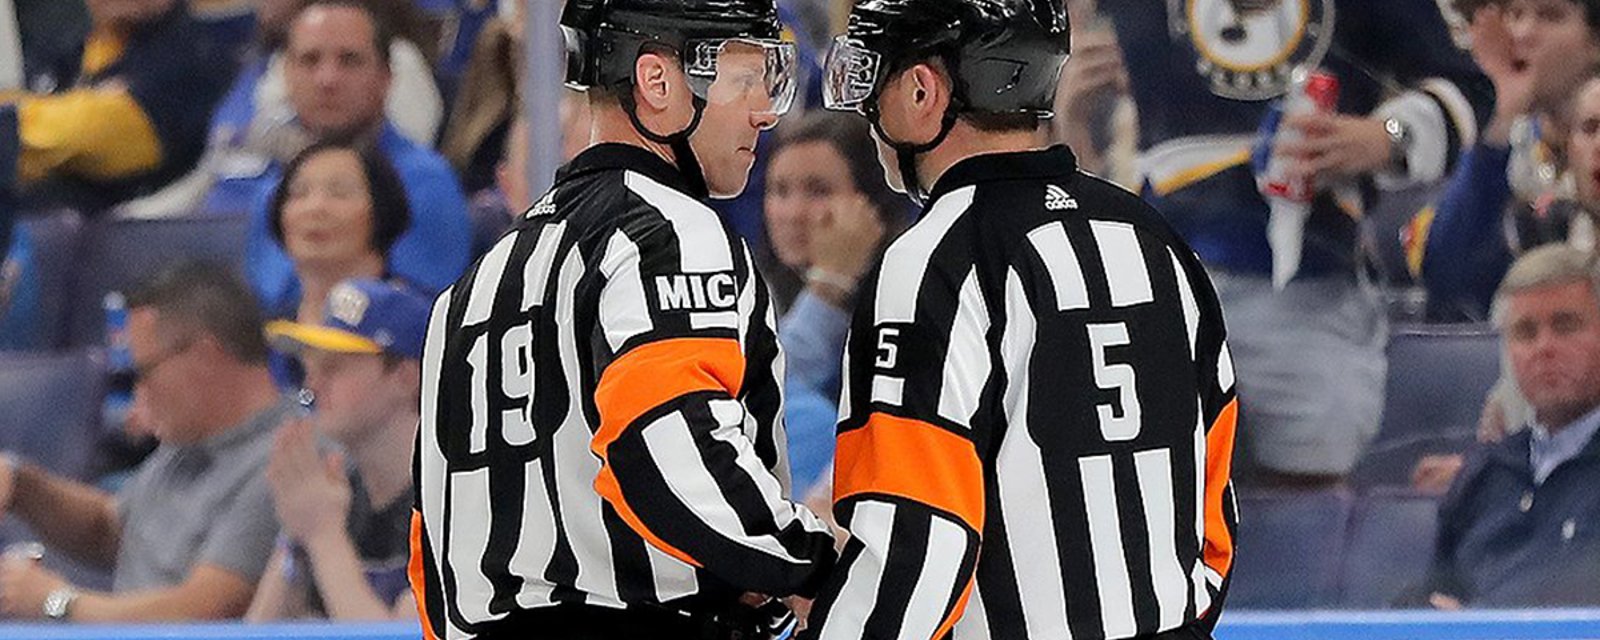 NHL makes a controversial call with its choice of referees for Game 7